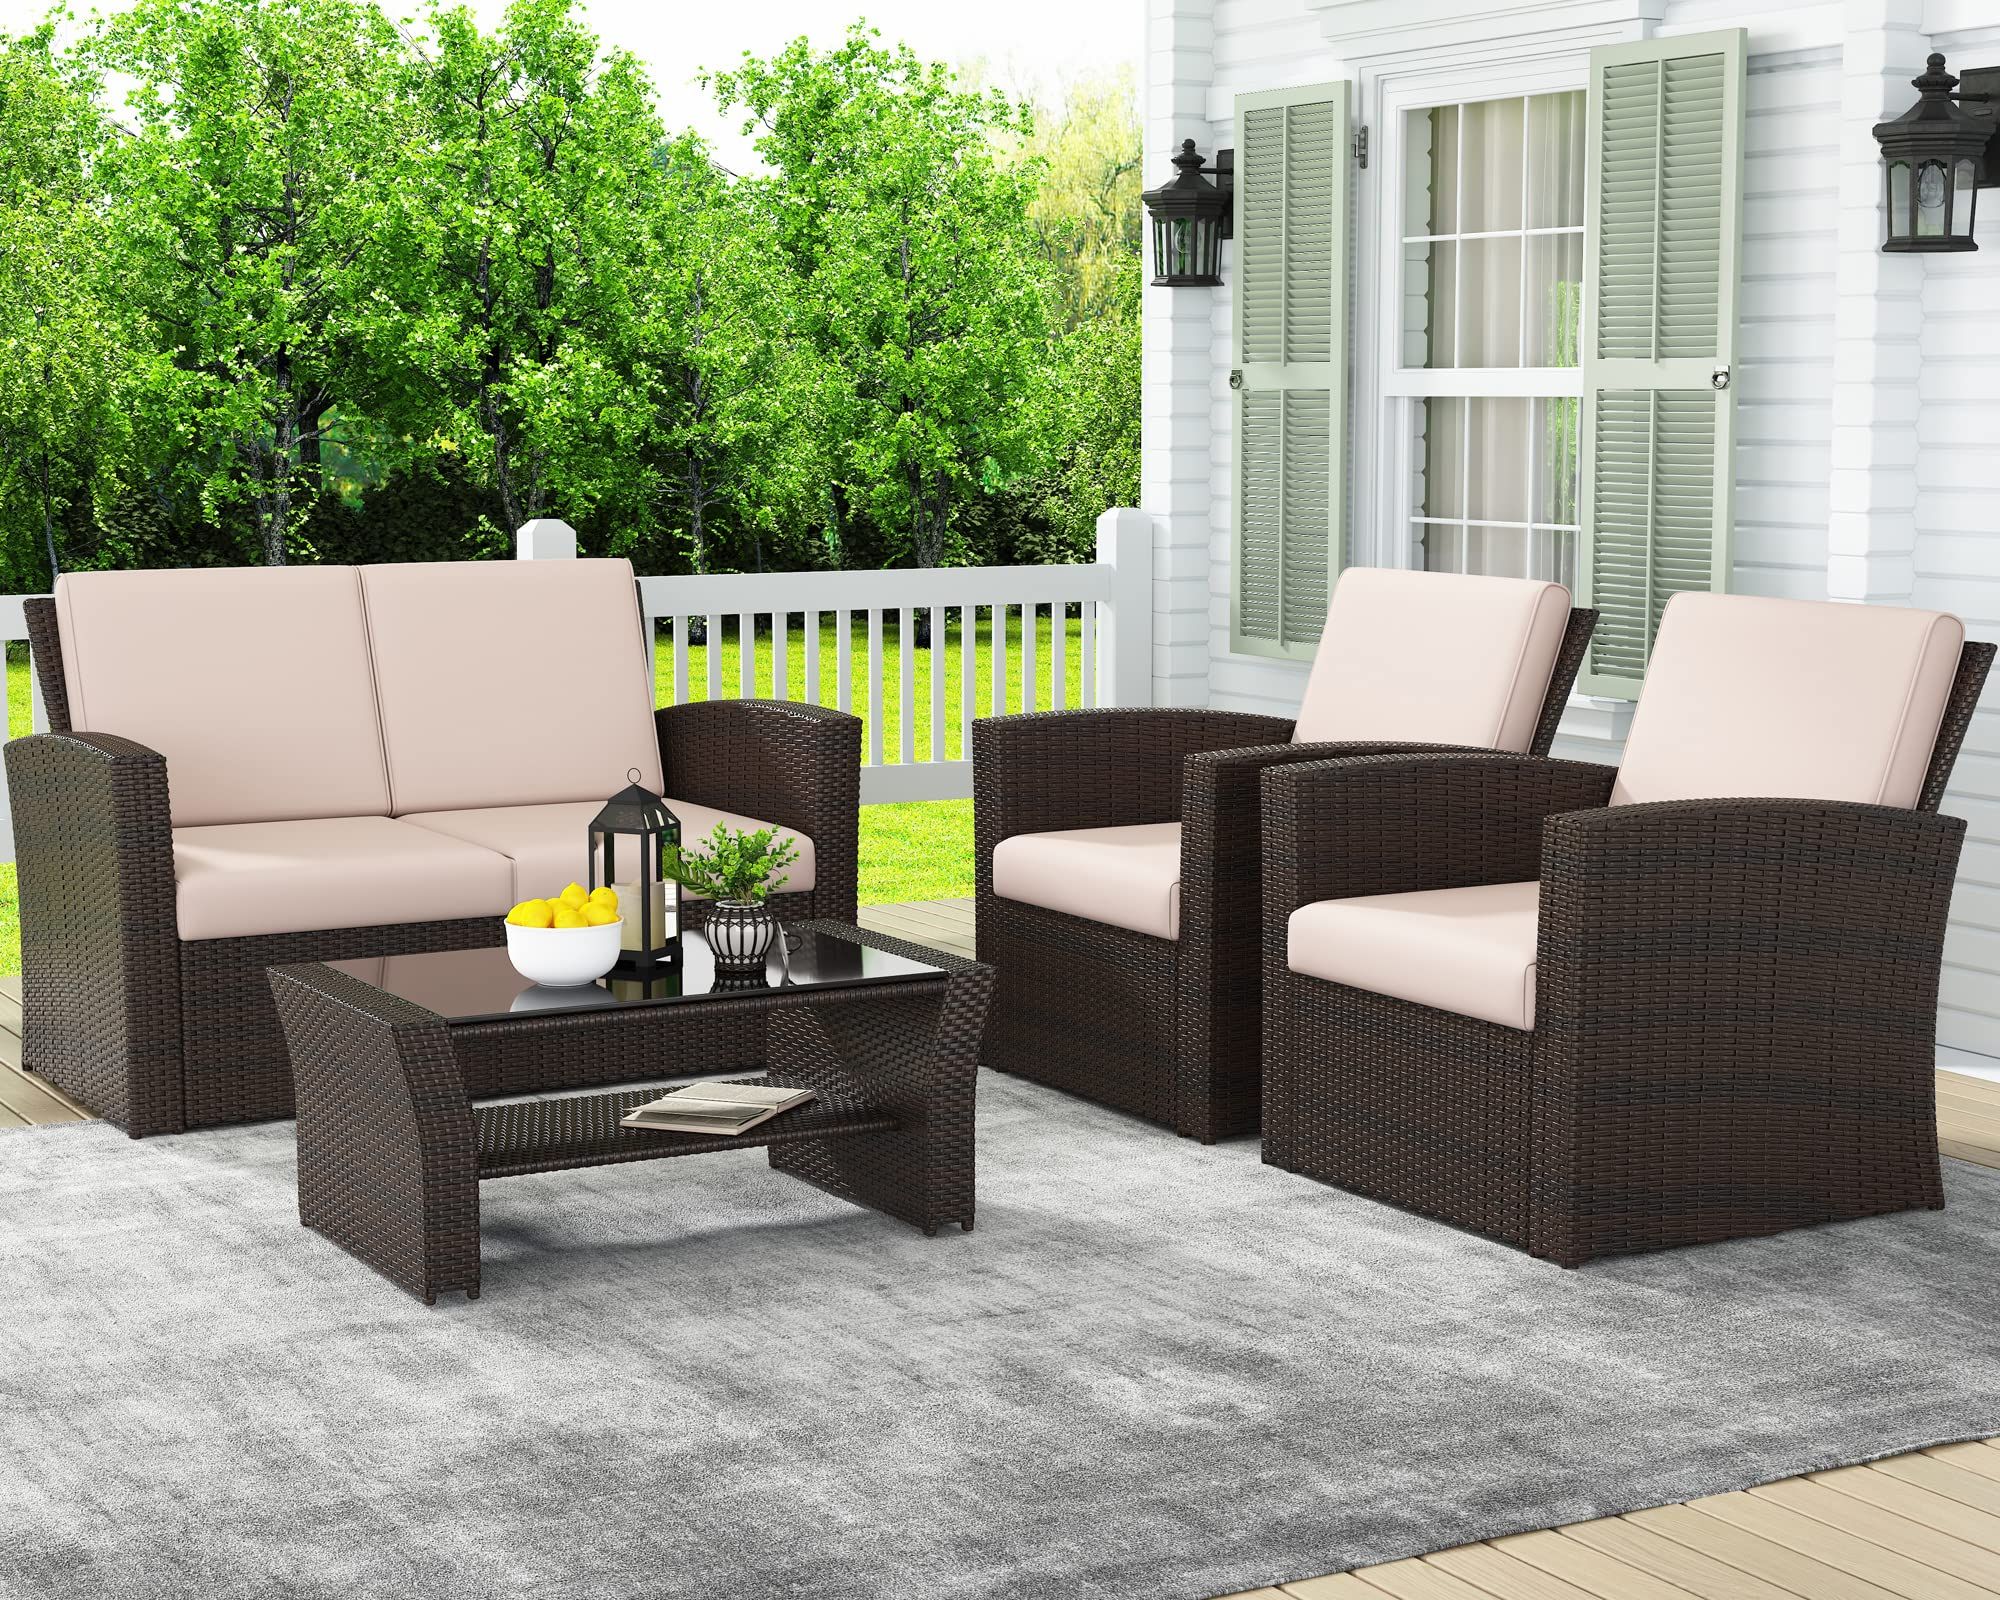 Most Recently Released Amazon: Layinsun 4 Piece Outdoor Patio Furniture Sets, Wicker  Conversation Sets, Rattan Sofa Chair With Cushion For Backyard Lawn Garden ( Brown) : Patio, Lawn & Garden Inside 4 Piece Outdoor Wicker Seating Set In Brown (Photo 1 of 15)